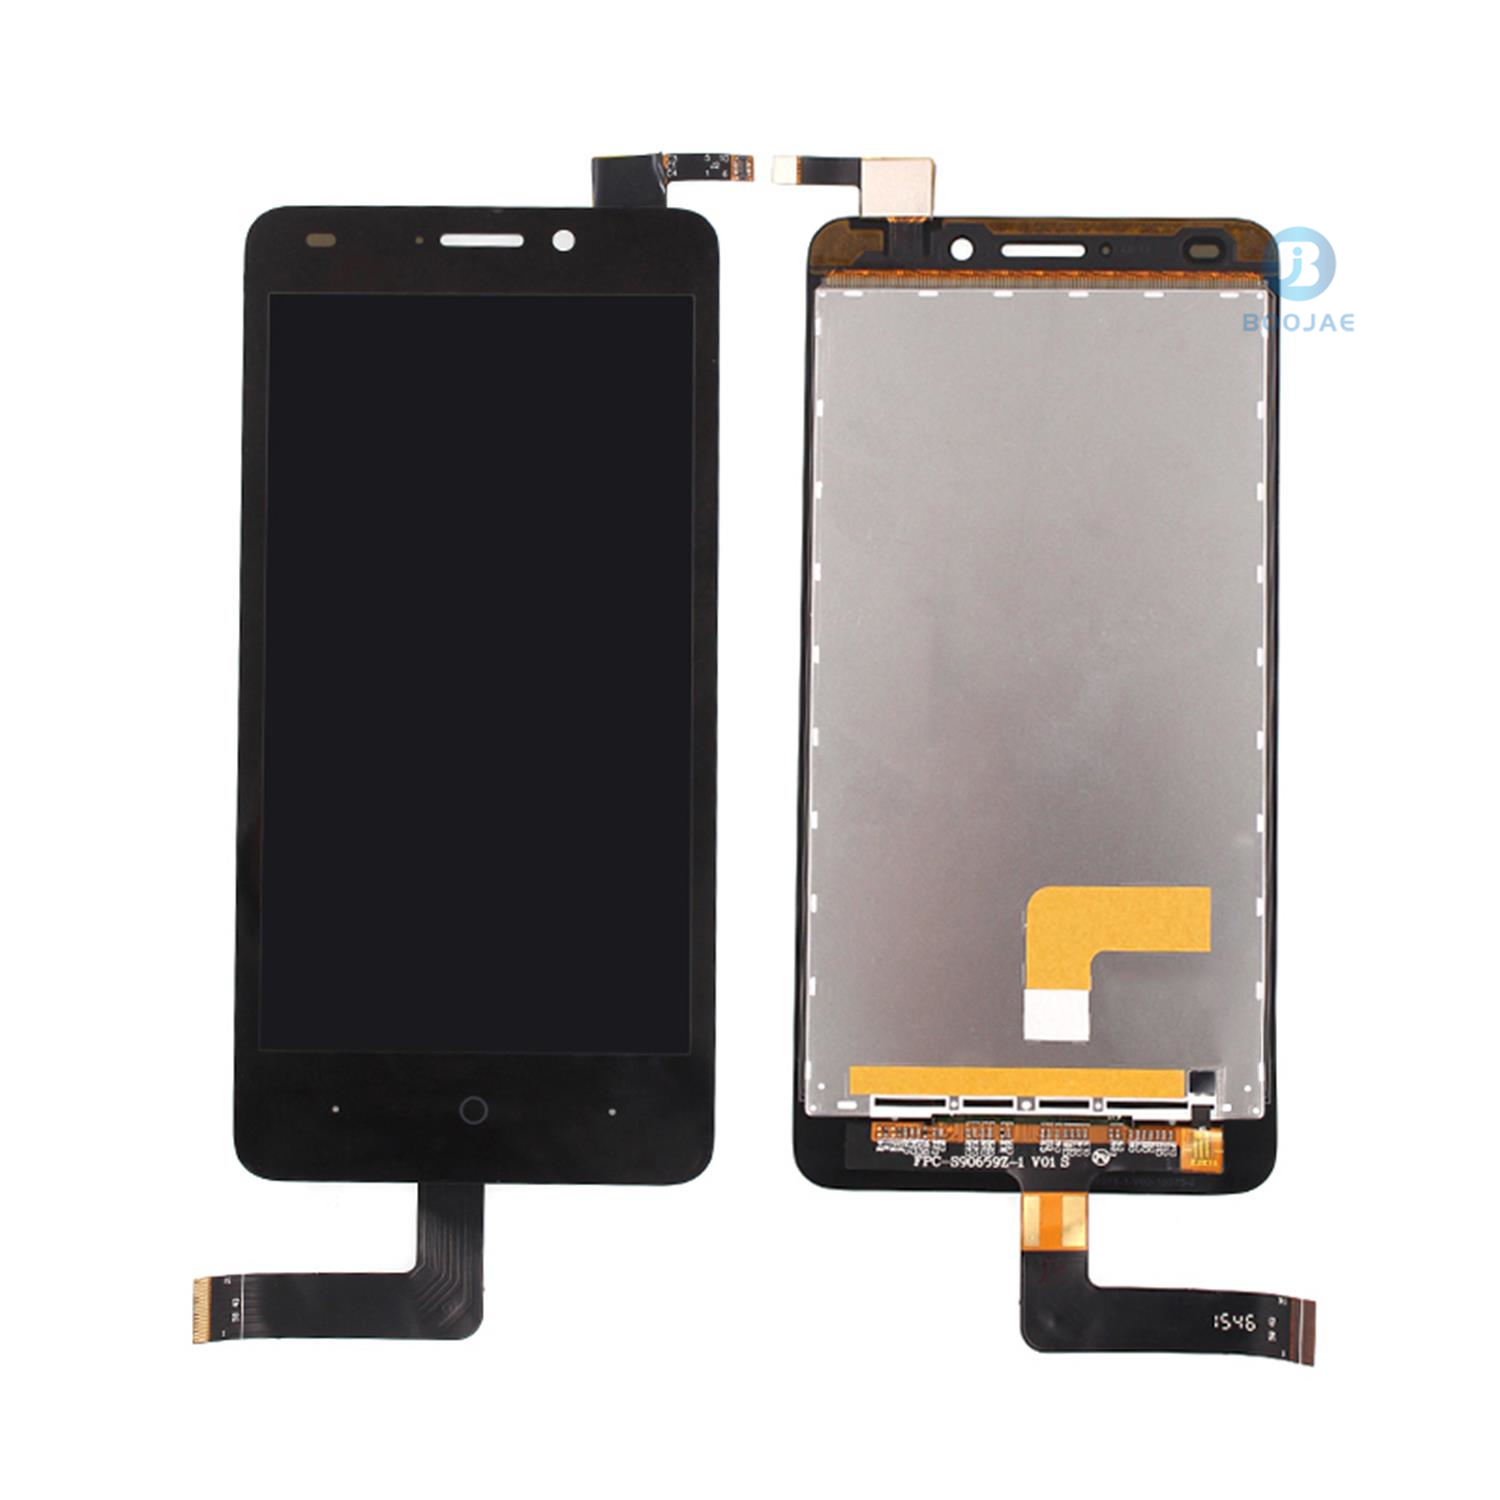 ZTE Z828 LCD Screen Display, Lcd Assembly Replacement